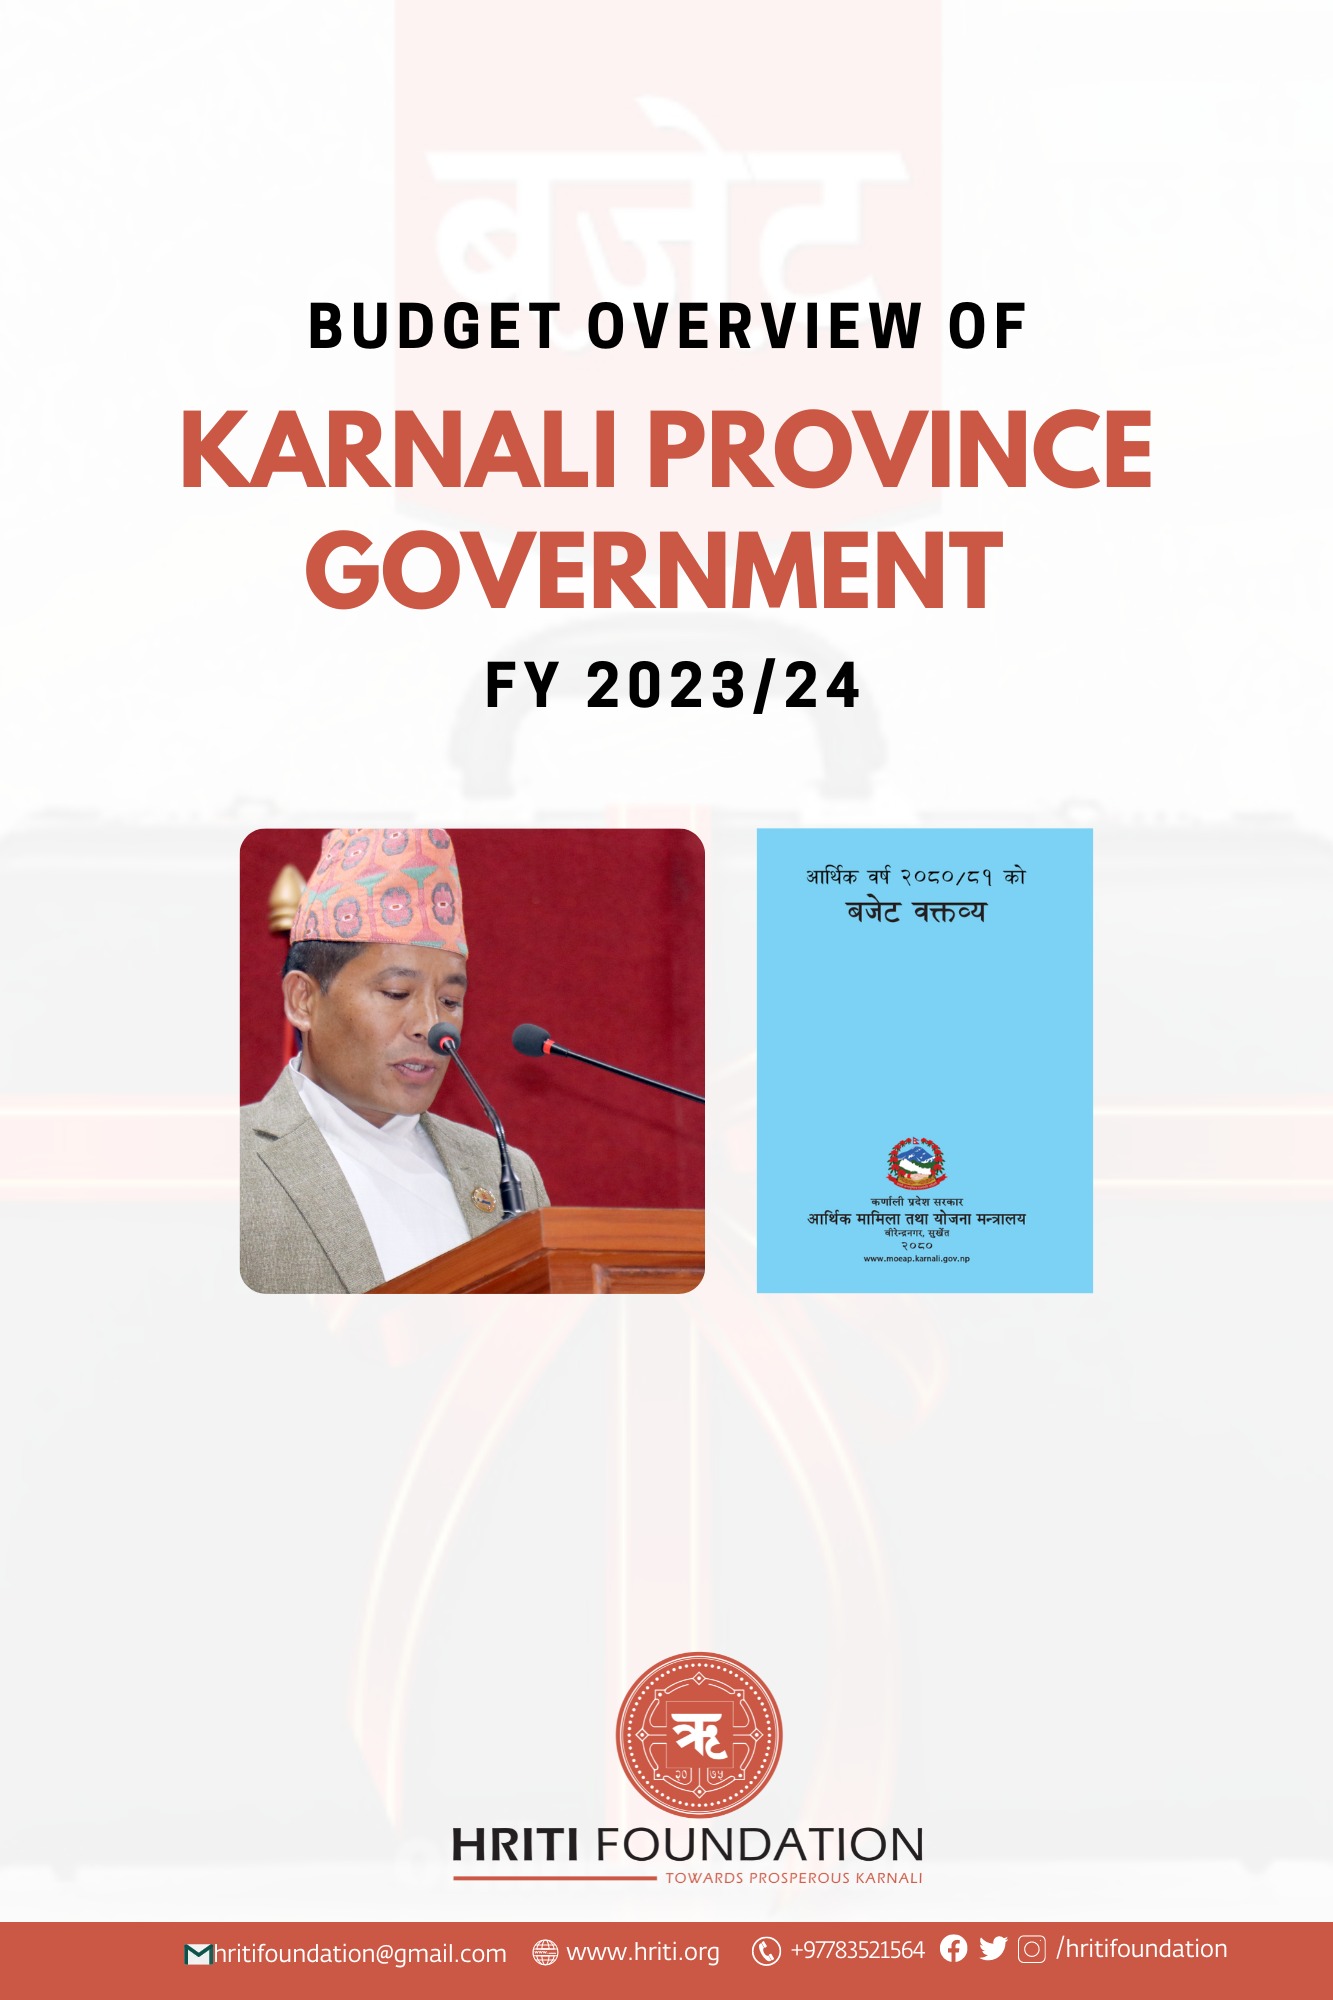 Budget Overview of Karnali Province Goverment for the FY 2023/24